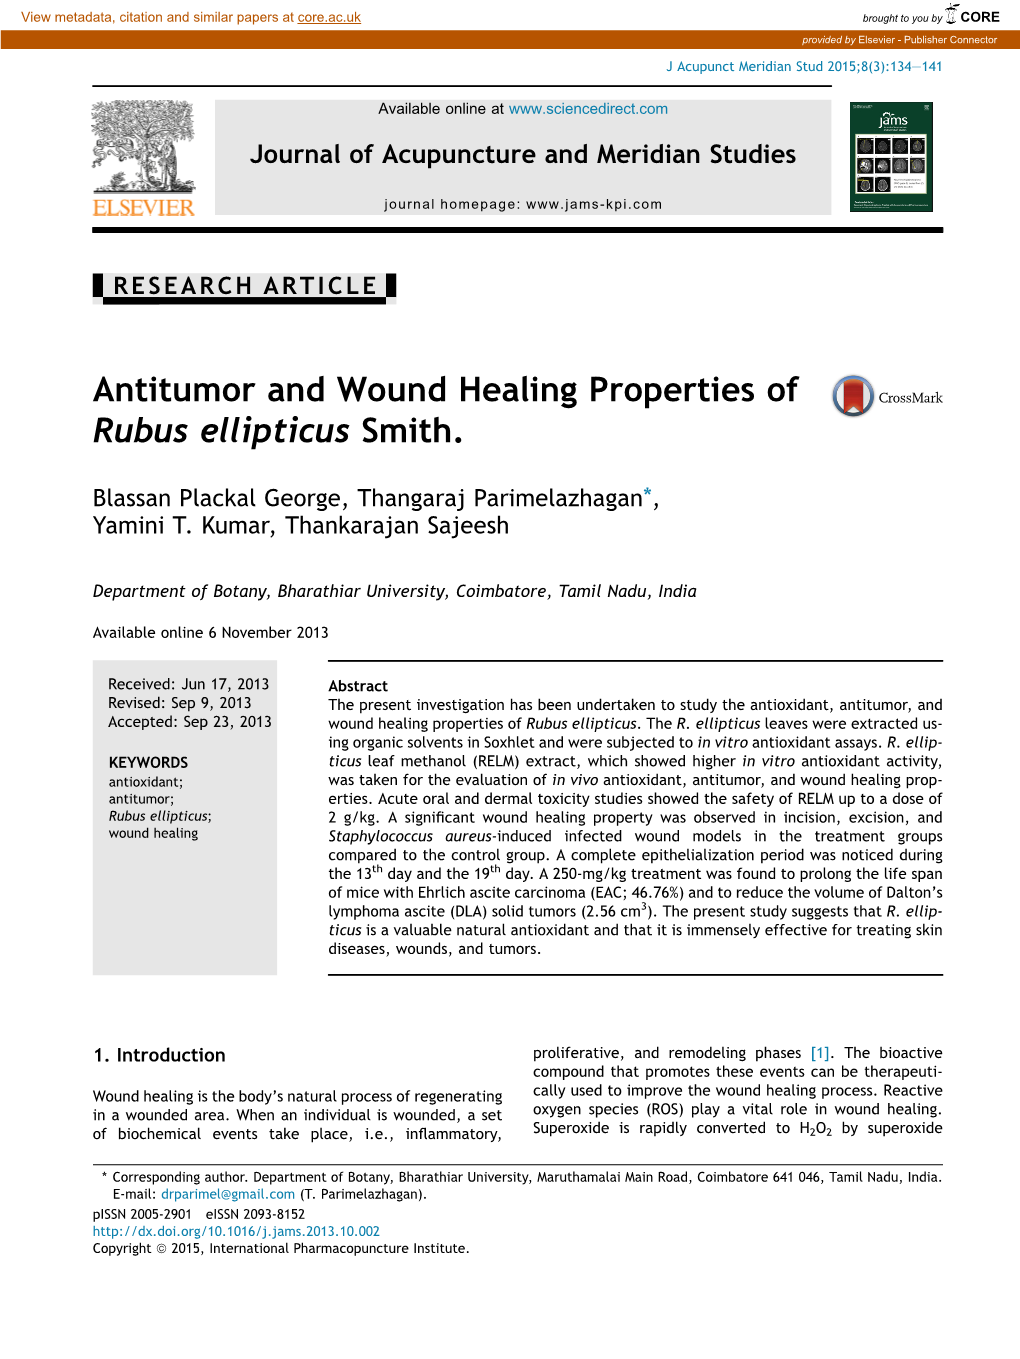 Antitumor and Wound Healing Properties of Rubus Ellipticus Smith